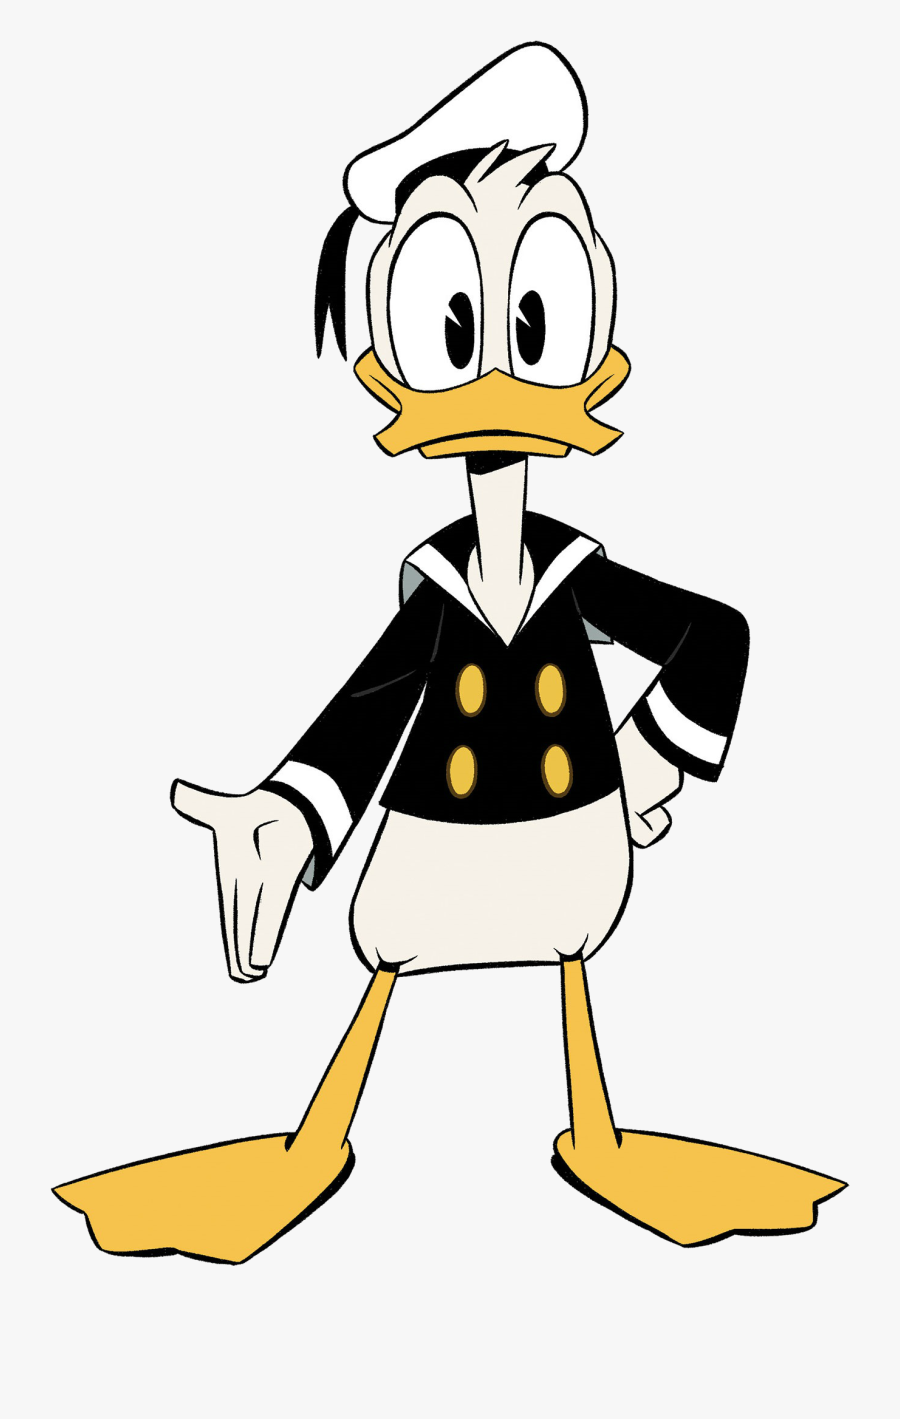 Ducktales Wiki Fandom Powered By Wikia Fauntleroy - Donald Duck Ducktales 2017, Transparent Clipart